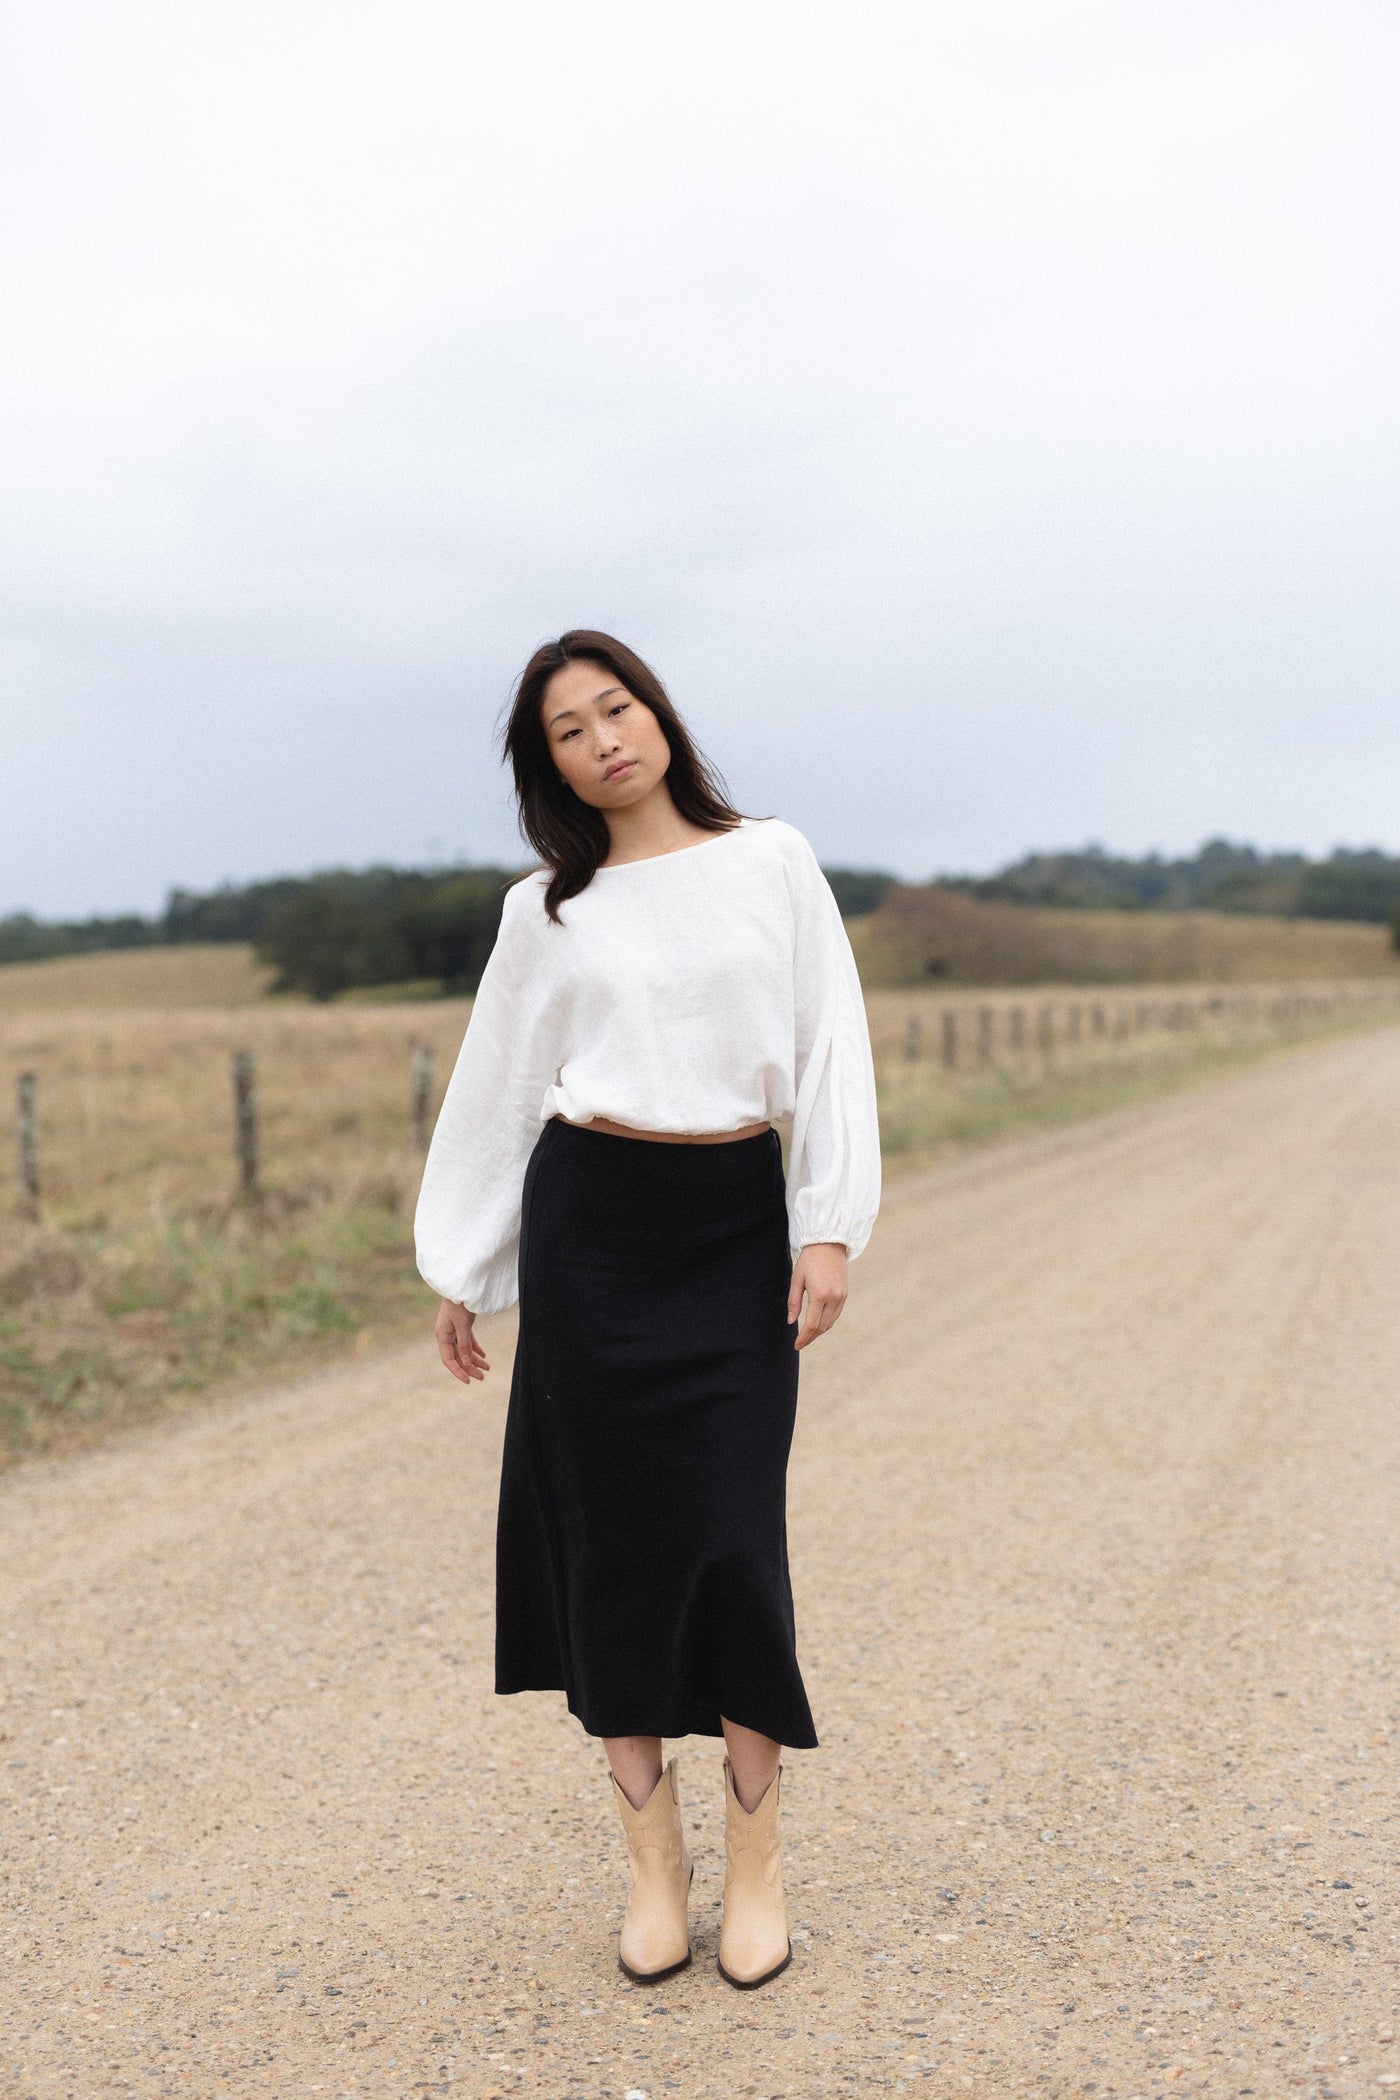 LILLY PILLY Collection Riley Bias Linen Skirt made from 100% organic linen in Black